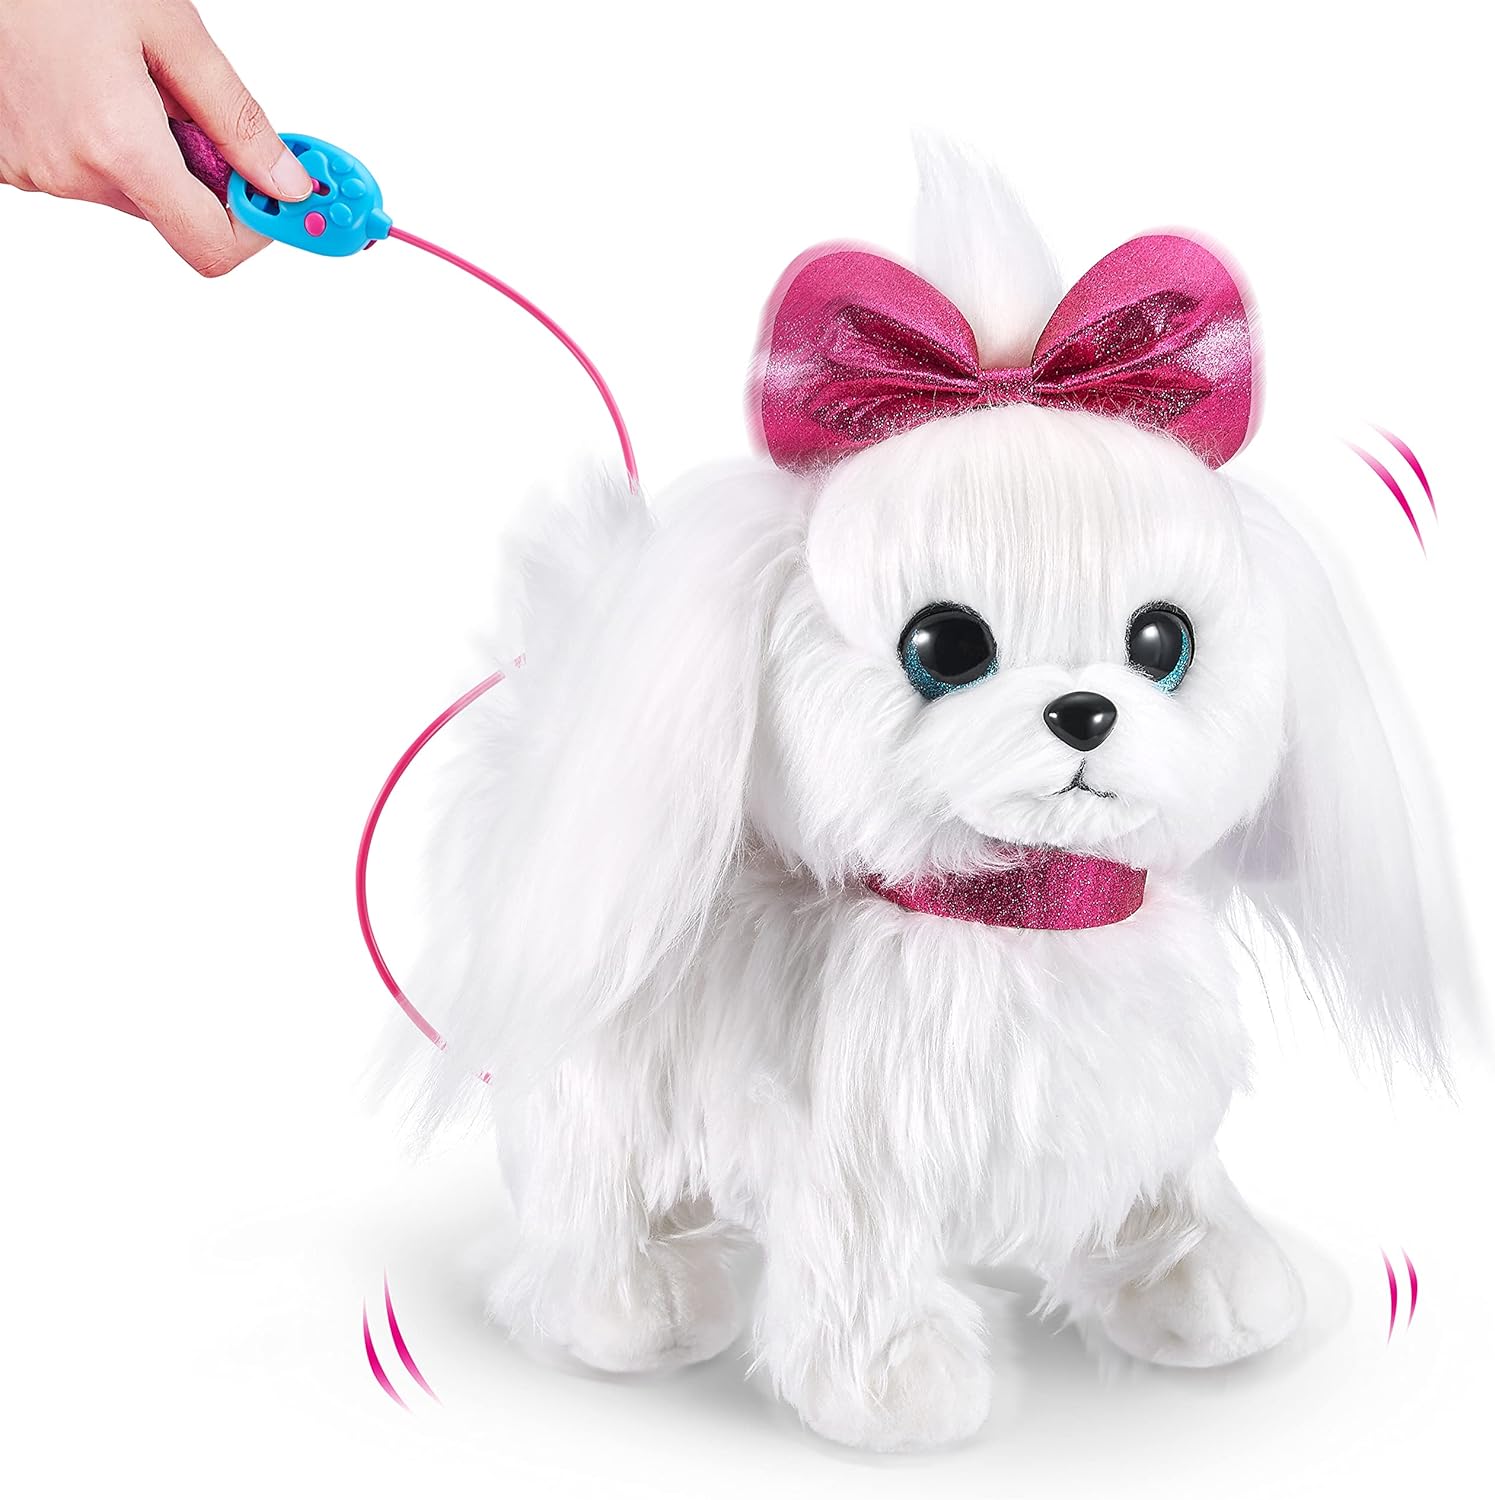 Zuru Pets Alive Lil' Paw The Walking Puppy Interactive Dog That Walk, Waggle, and Barks, Interactive Plush Pet